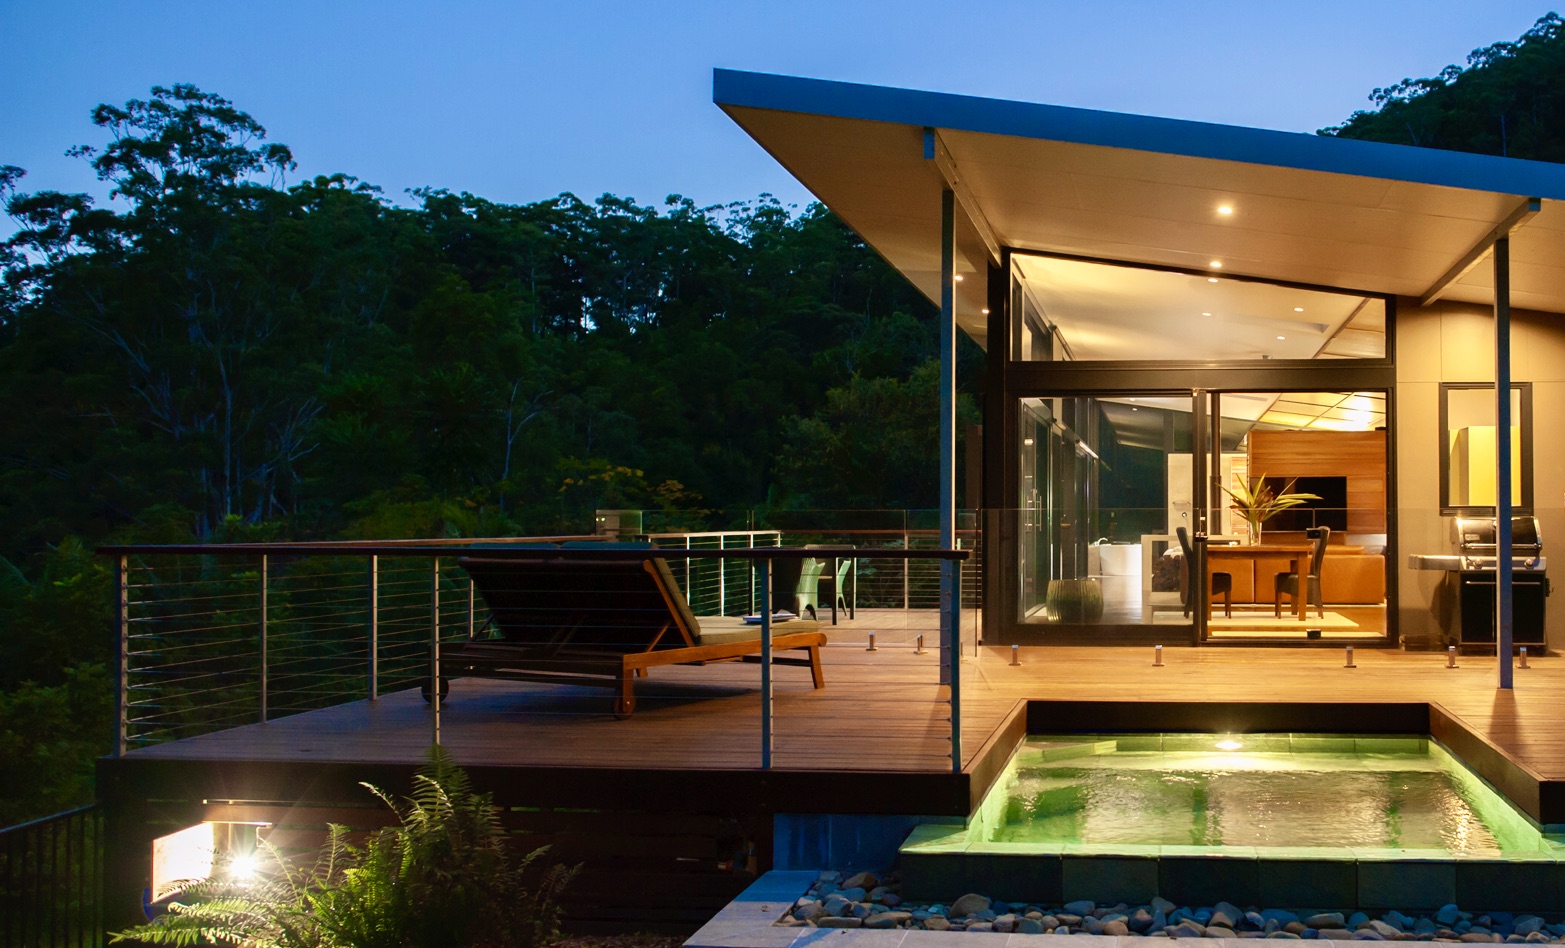 Byron Bay luxury lodge in the rainforest hinterland set high with mountain views at dusk from the pool deck.